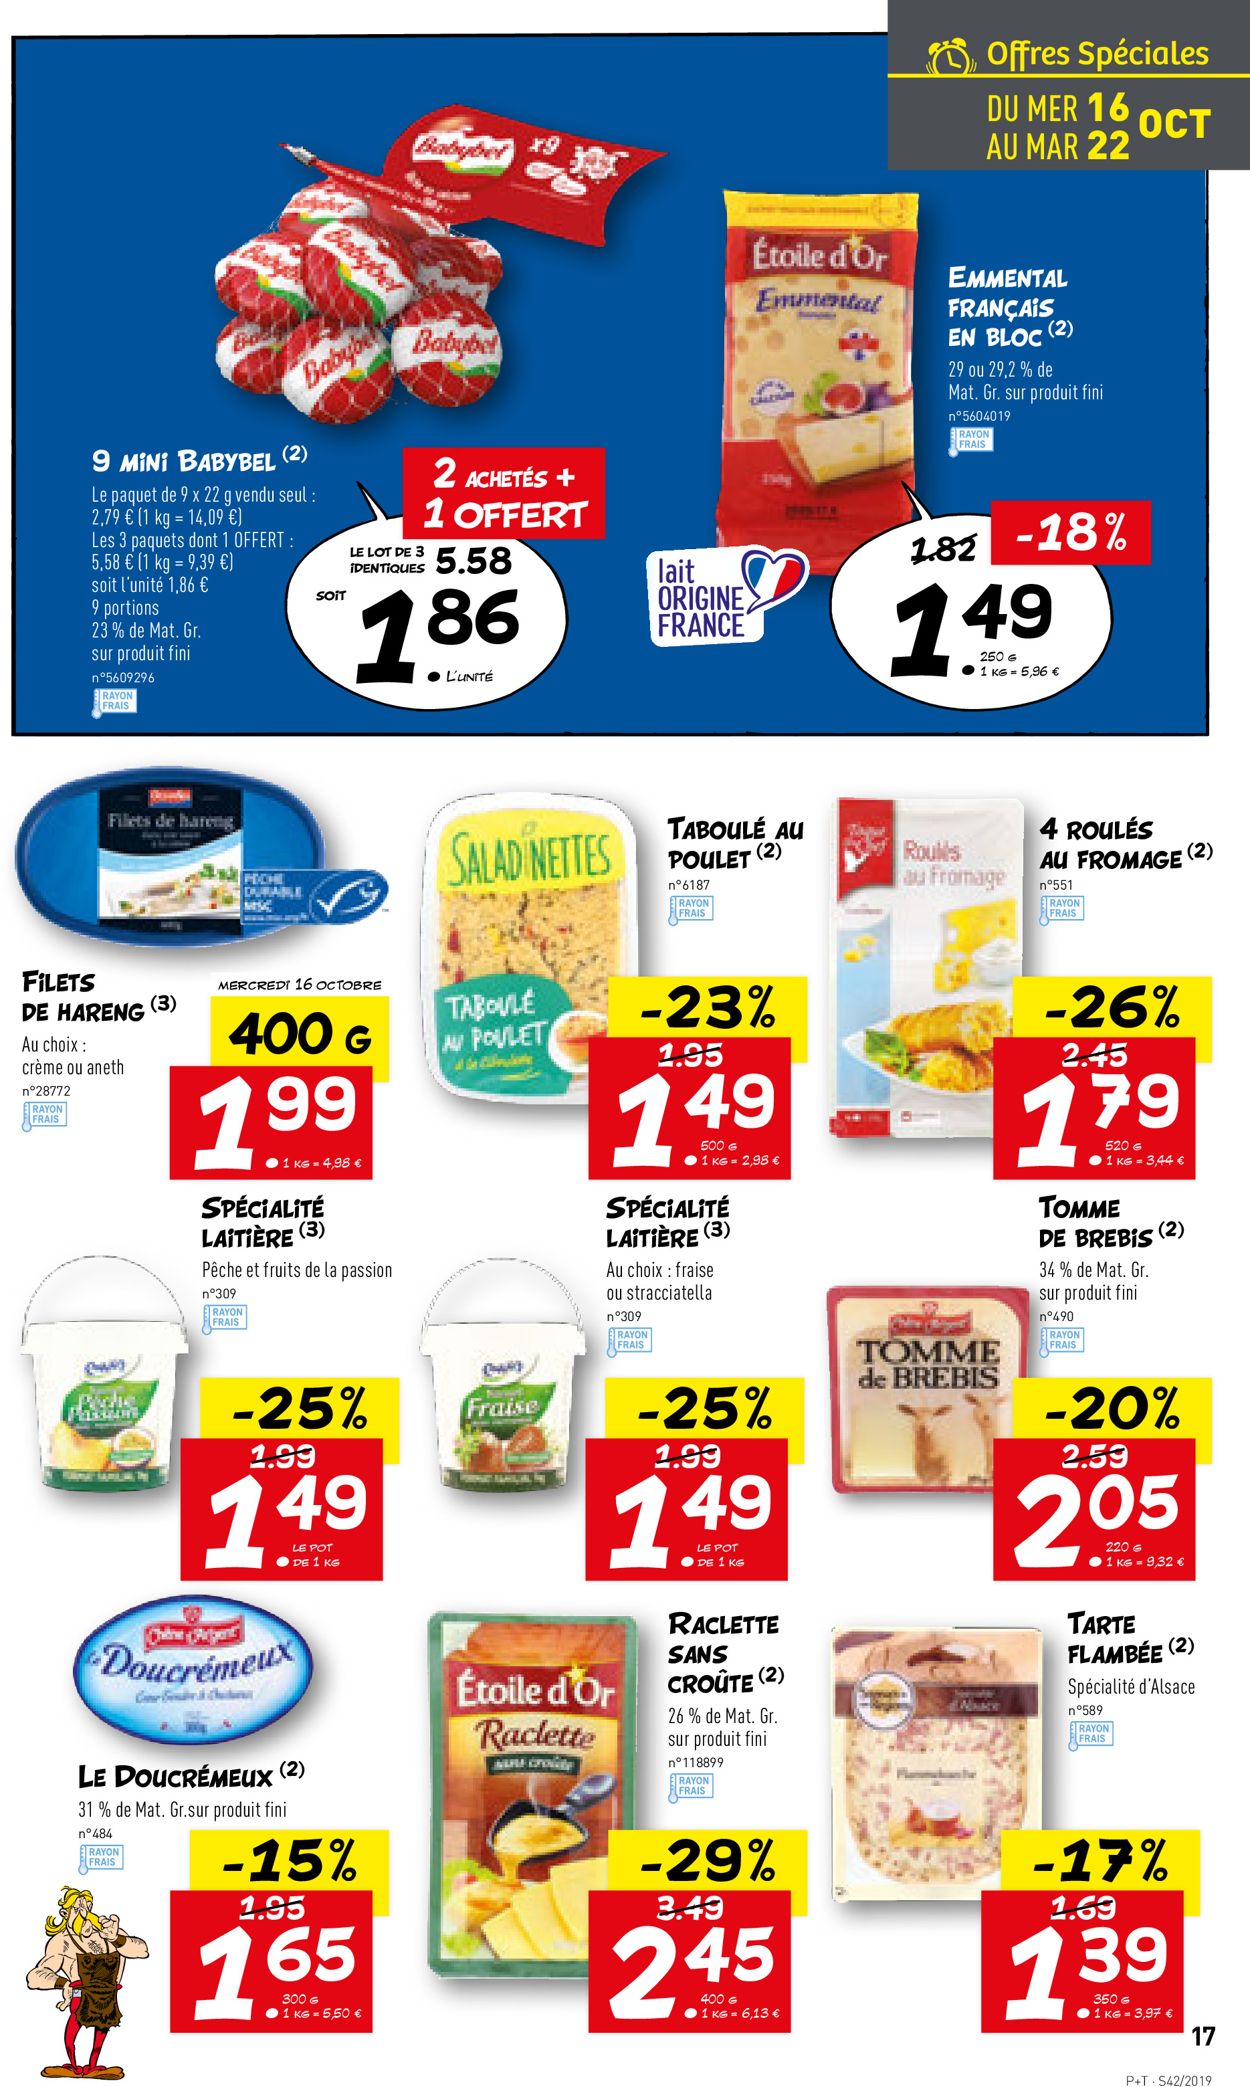 Lidl Catalogue - 16.10-22.10.2019 (Page 17)